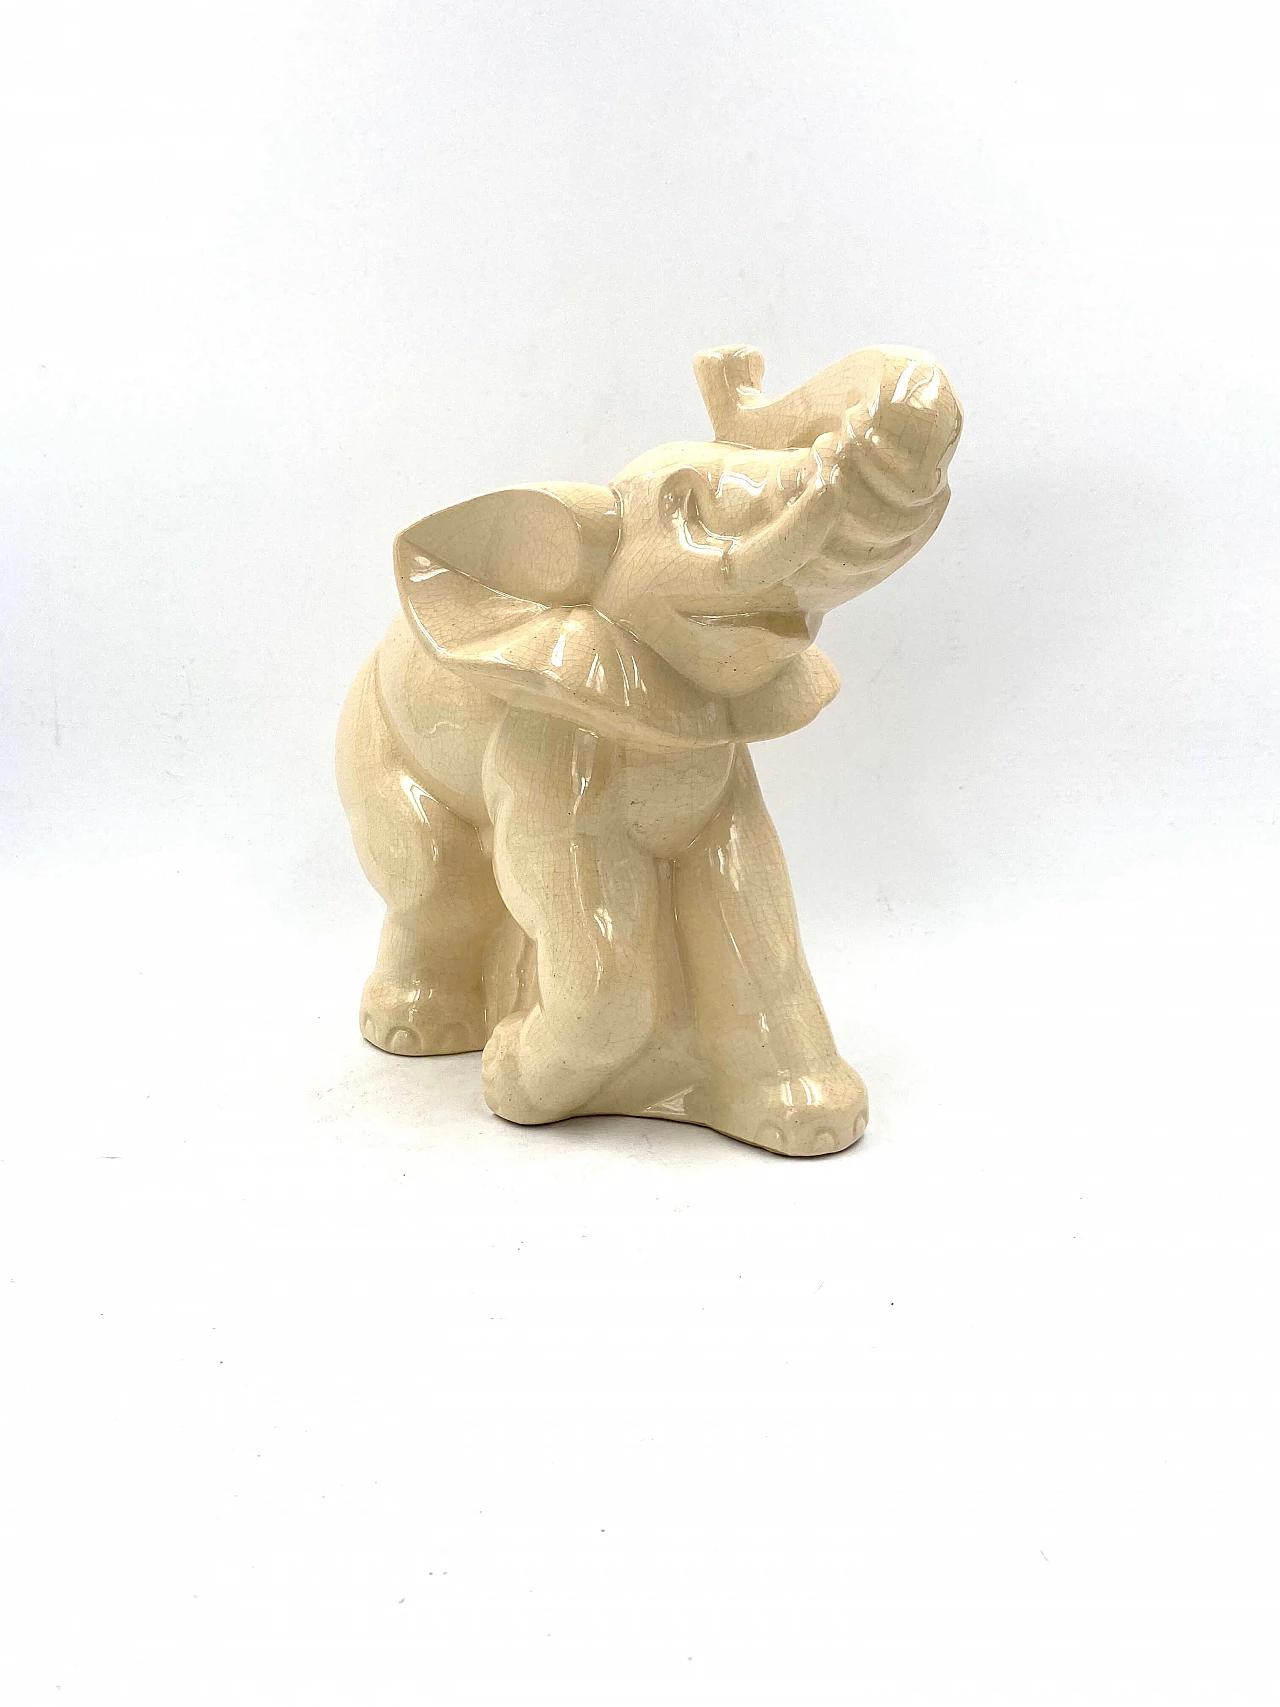 Sculpture of an elephant in craquelé glazed terracotta by Fontinelle, 1940s 1329673